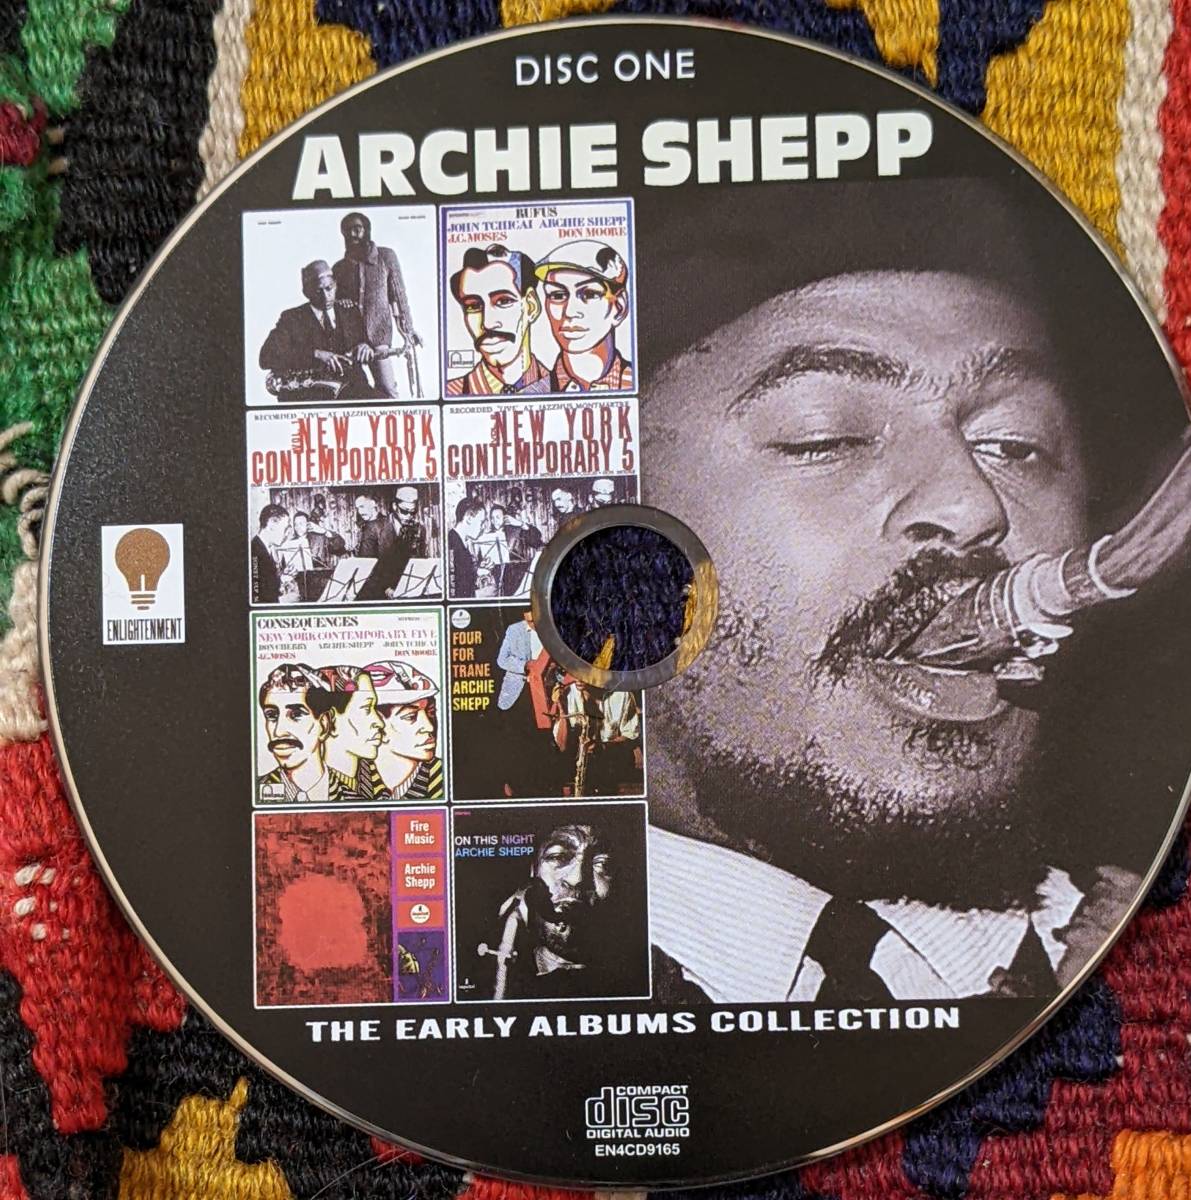 60's アーチー・シェップ Archie Shepp (9in4 4枚組CD)/ The Early Albums Collection 　Enlightenment EN4CD9165_画像6